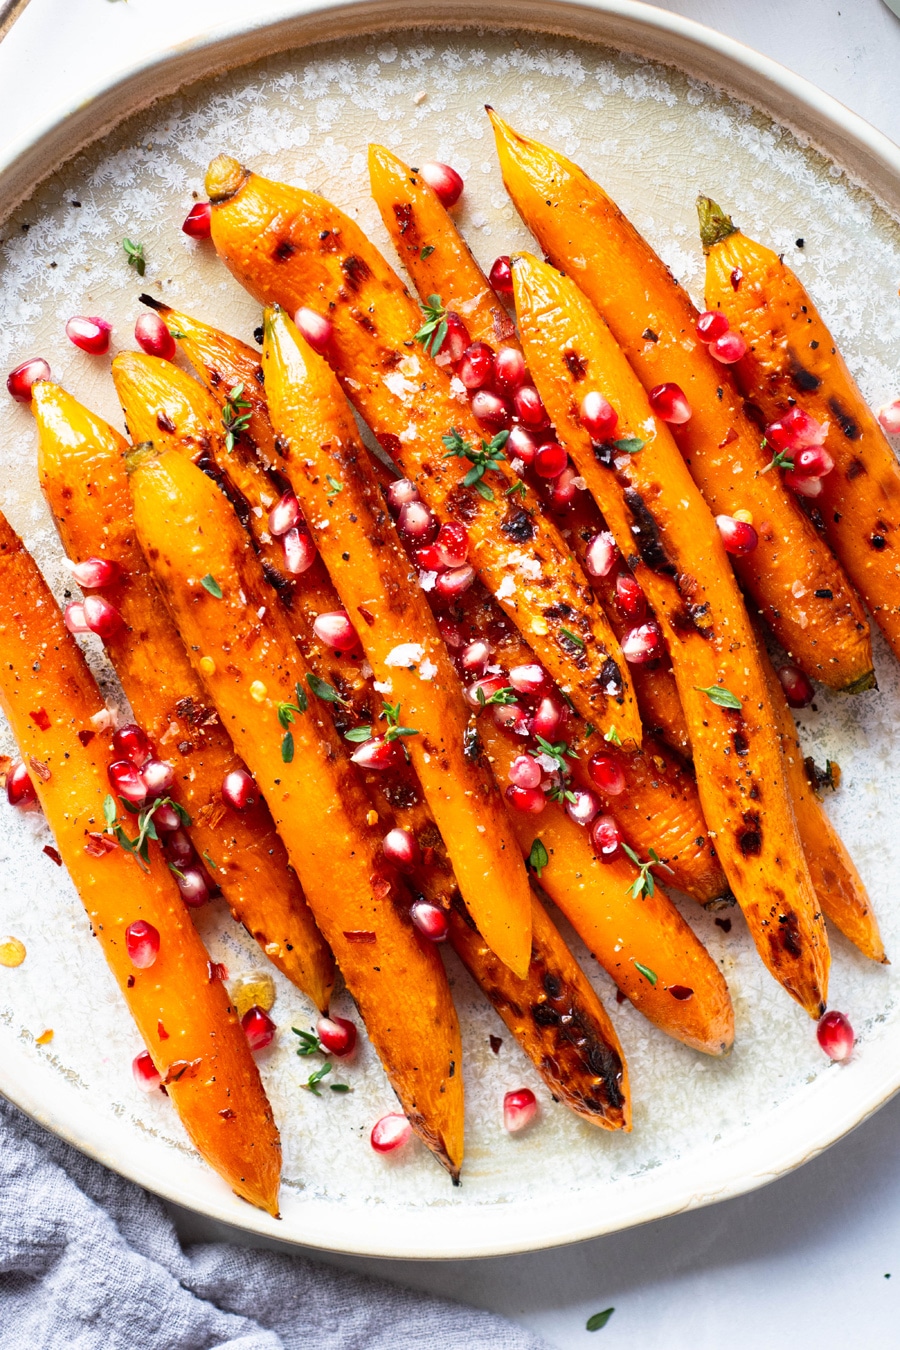 Maple Chili Glazed Carrots with Thyme and Pomegranate - Vegan + GF